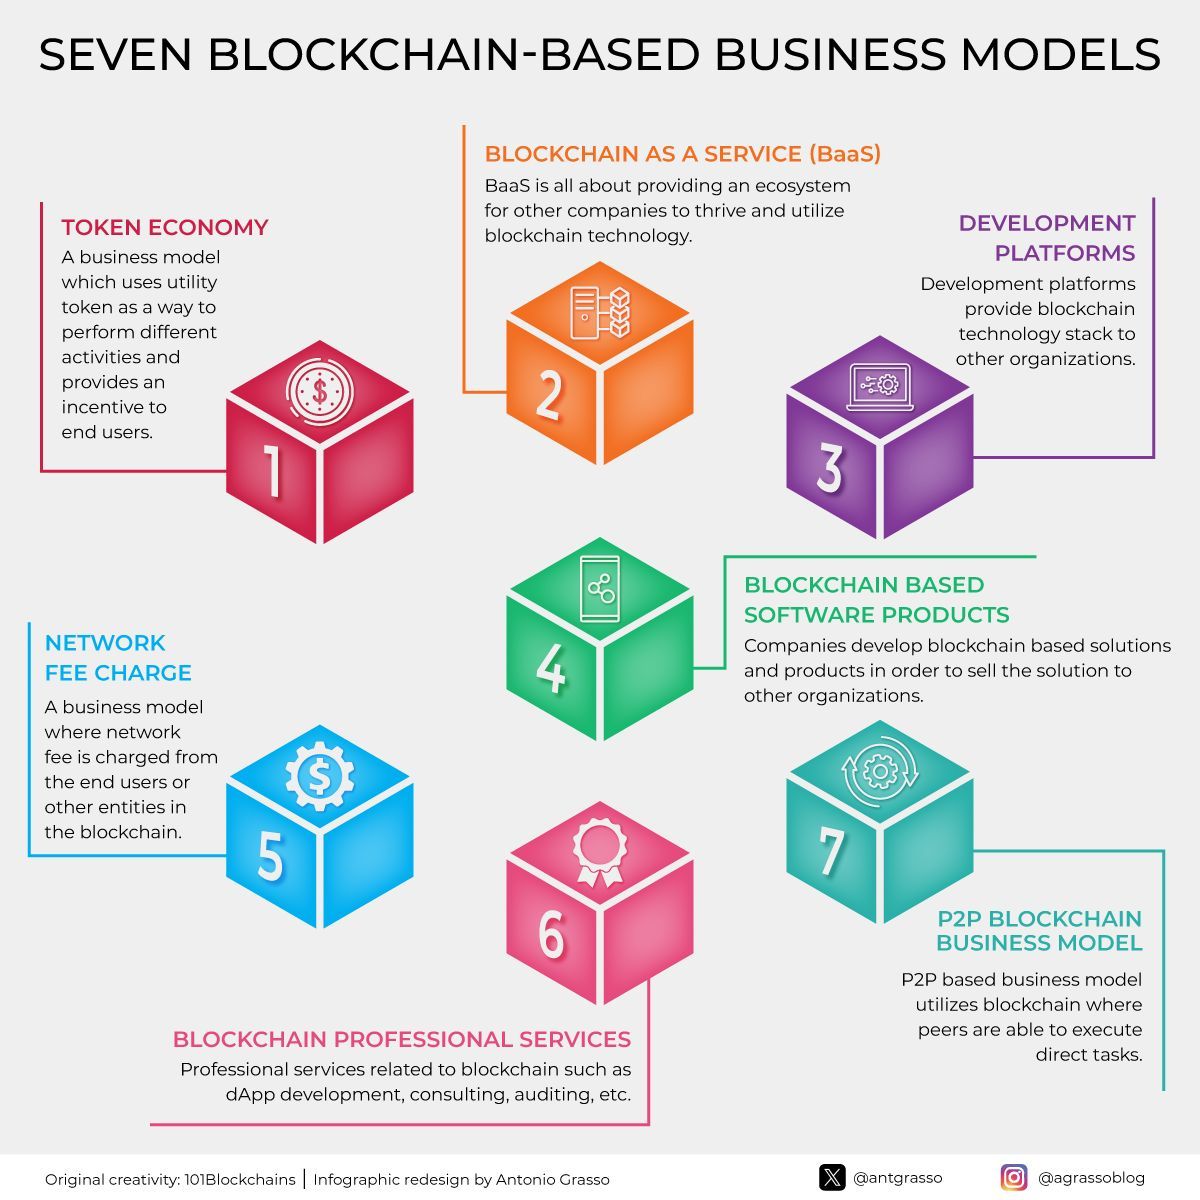 Blockchain spurs novel business models, reshaping incentives with token economies and broadening access through the Blockchain-as-a-Service (BaaS) paradigm. It is becoming the new app backbone, with P2P models enhancing direct interactions and efficiency. Microblog @antgrasso